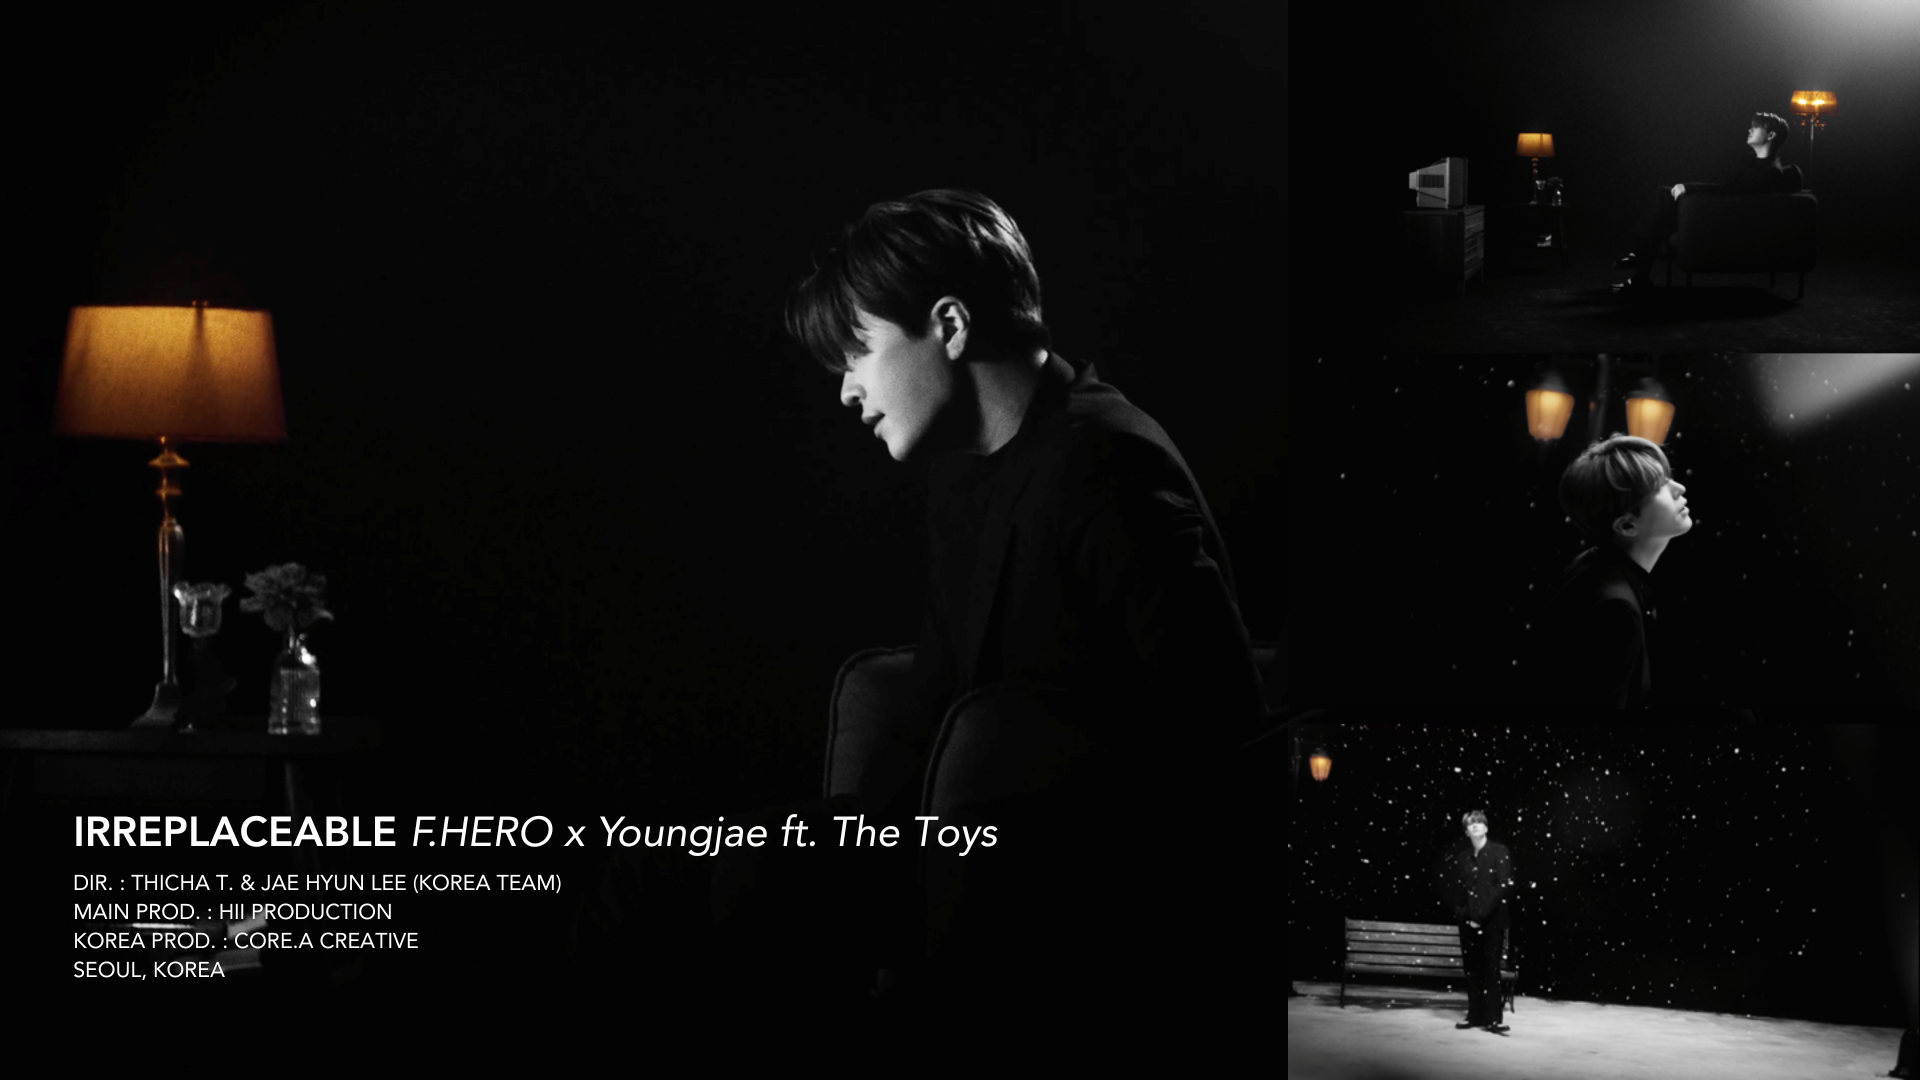 IRREPLACEABLE F.HERO + Youngjae ft. The Toys